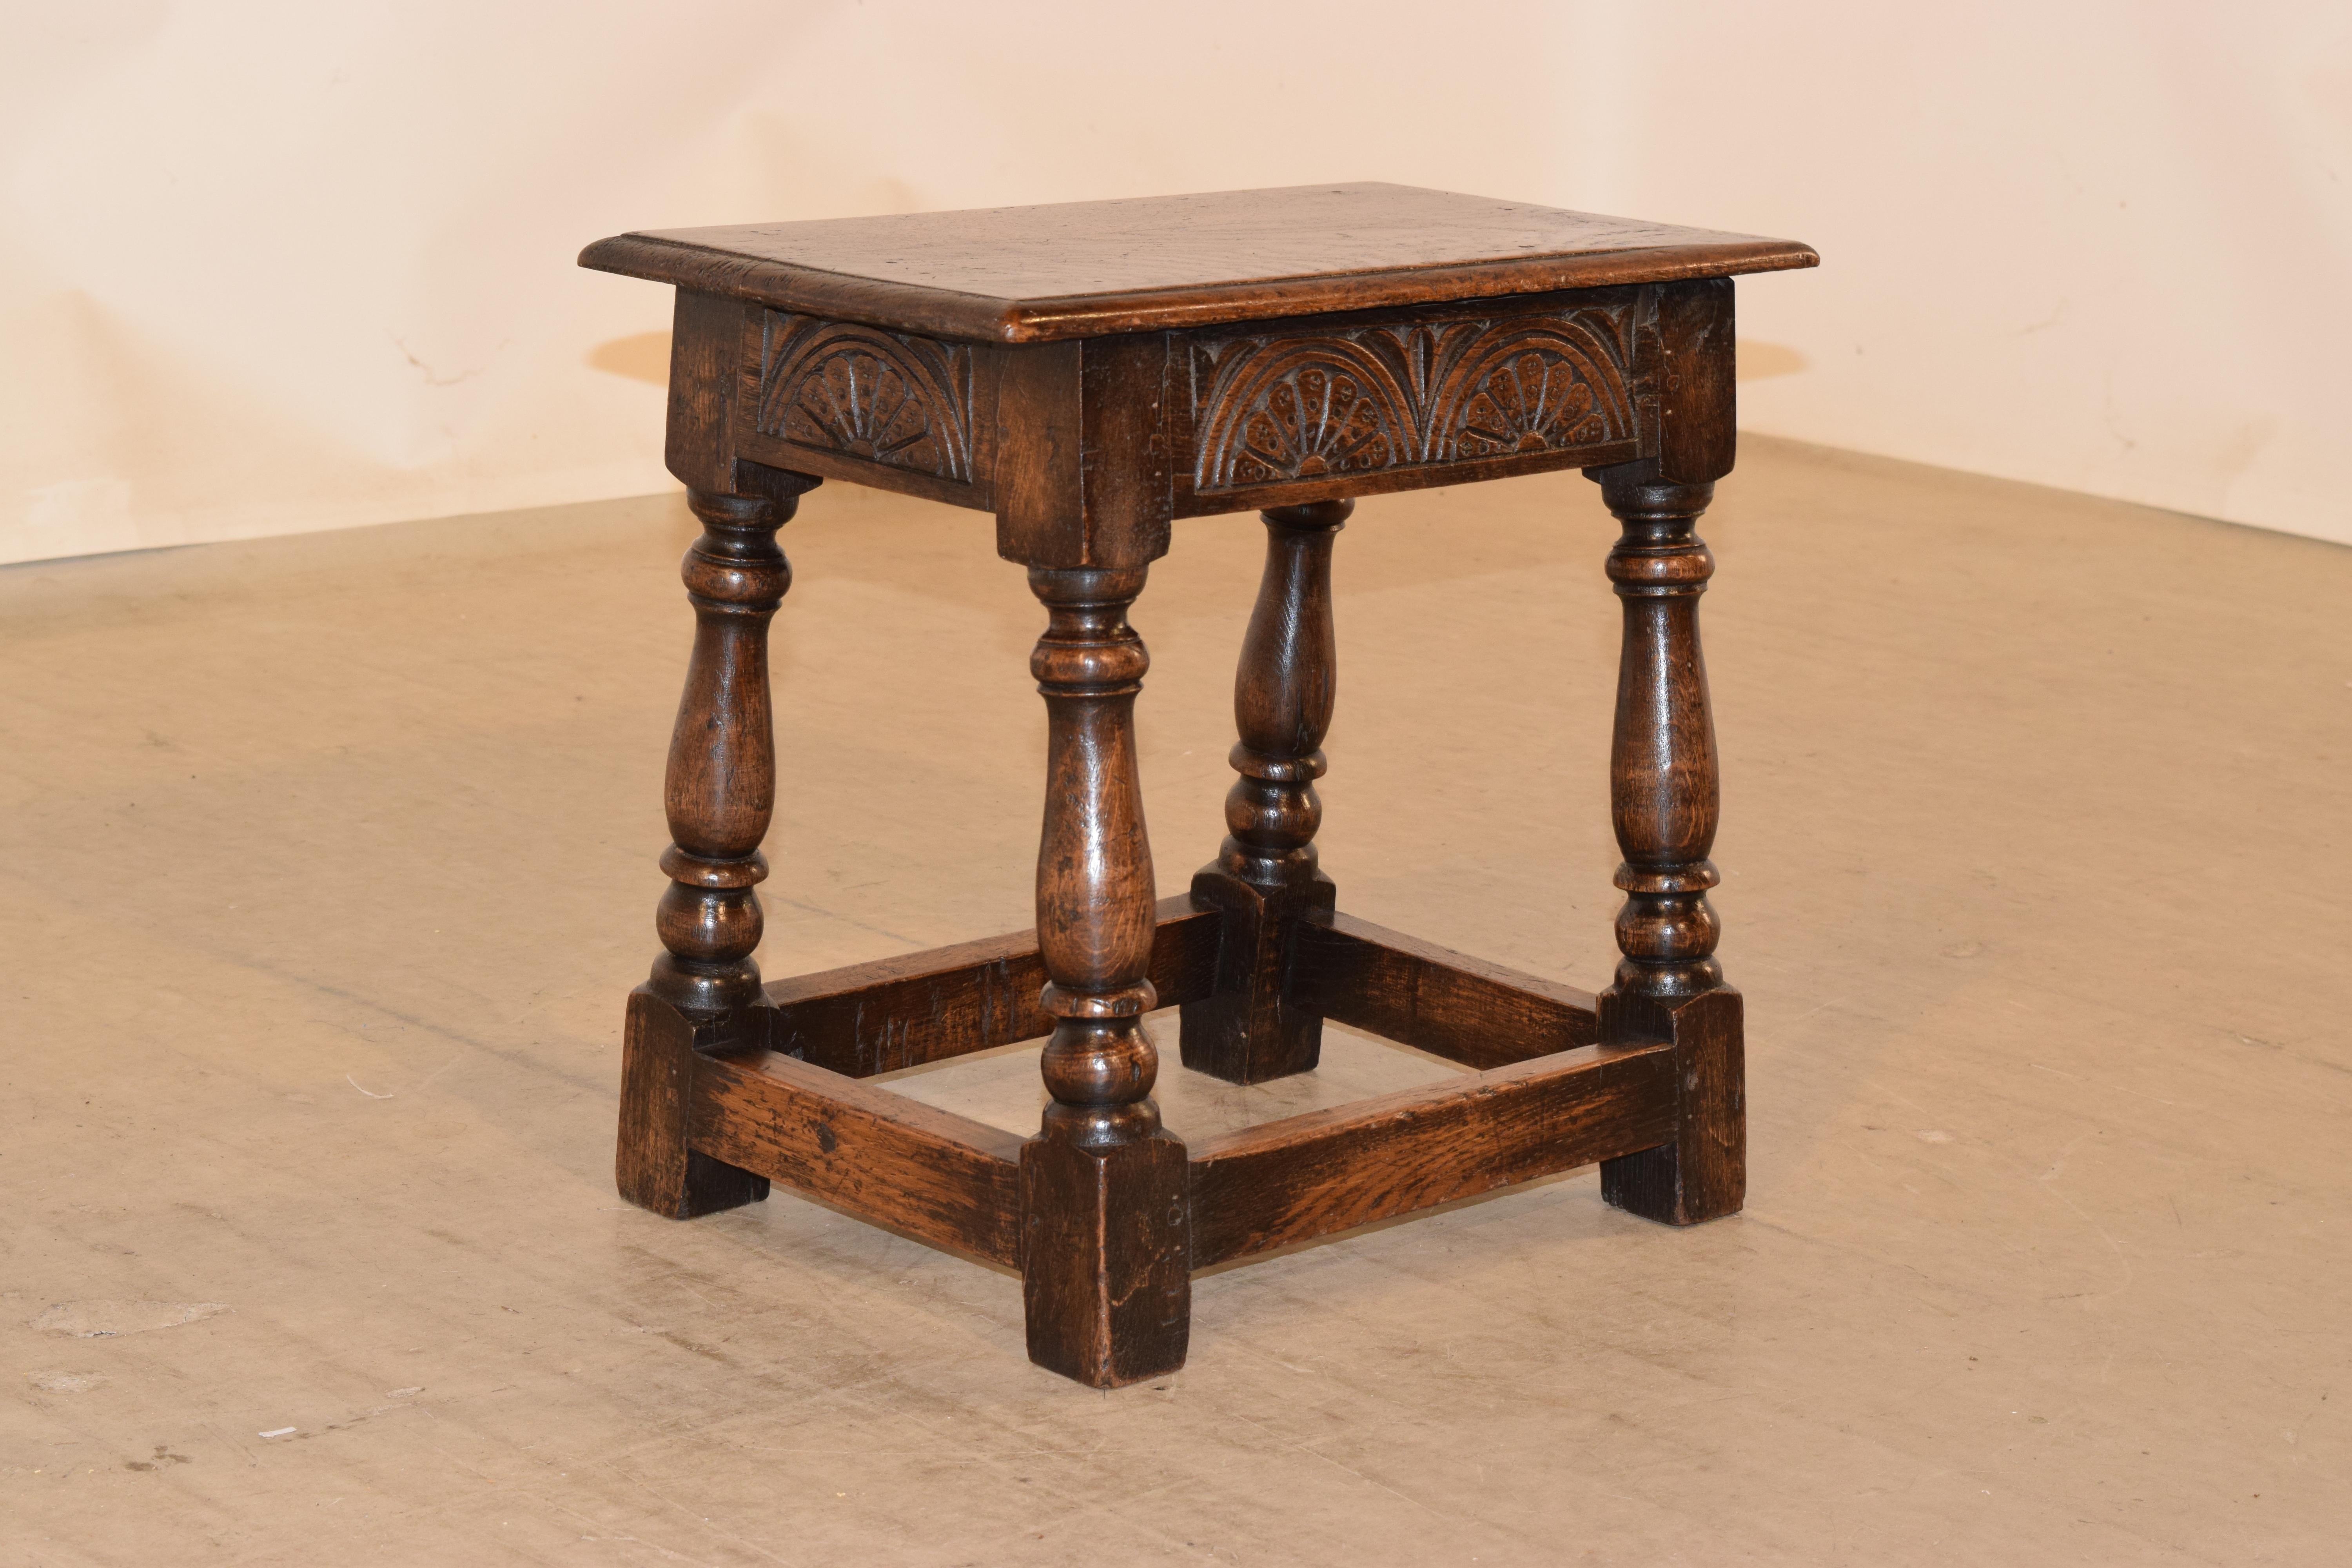 19th century oak joint stool from England with a beveled edge around the top, over a simple apron with hand carved lunette decoration and supported on hand turned and splayed legs, joined by simple stretchers.